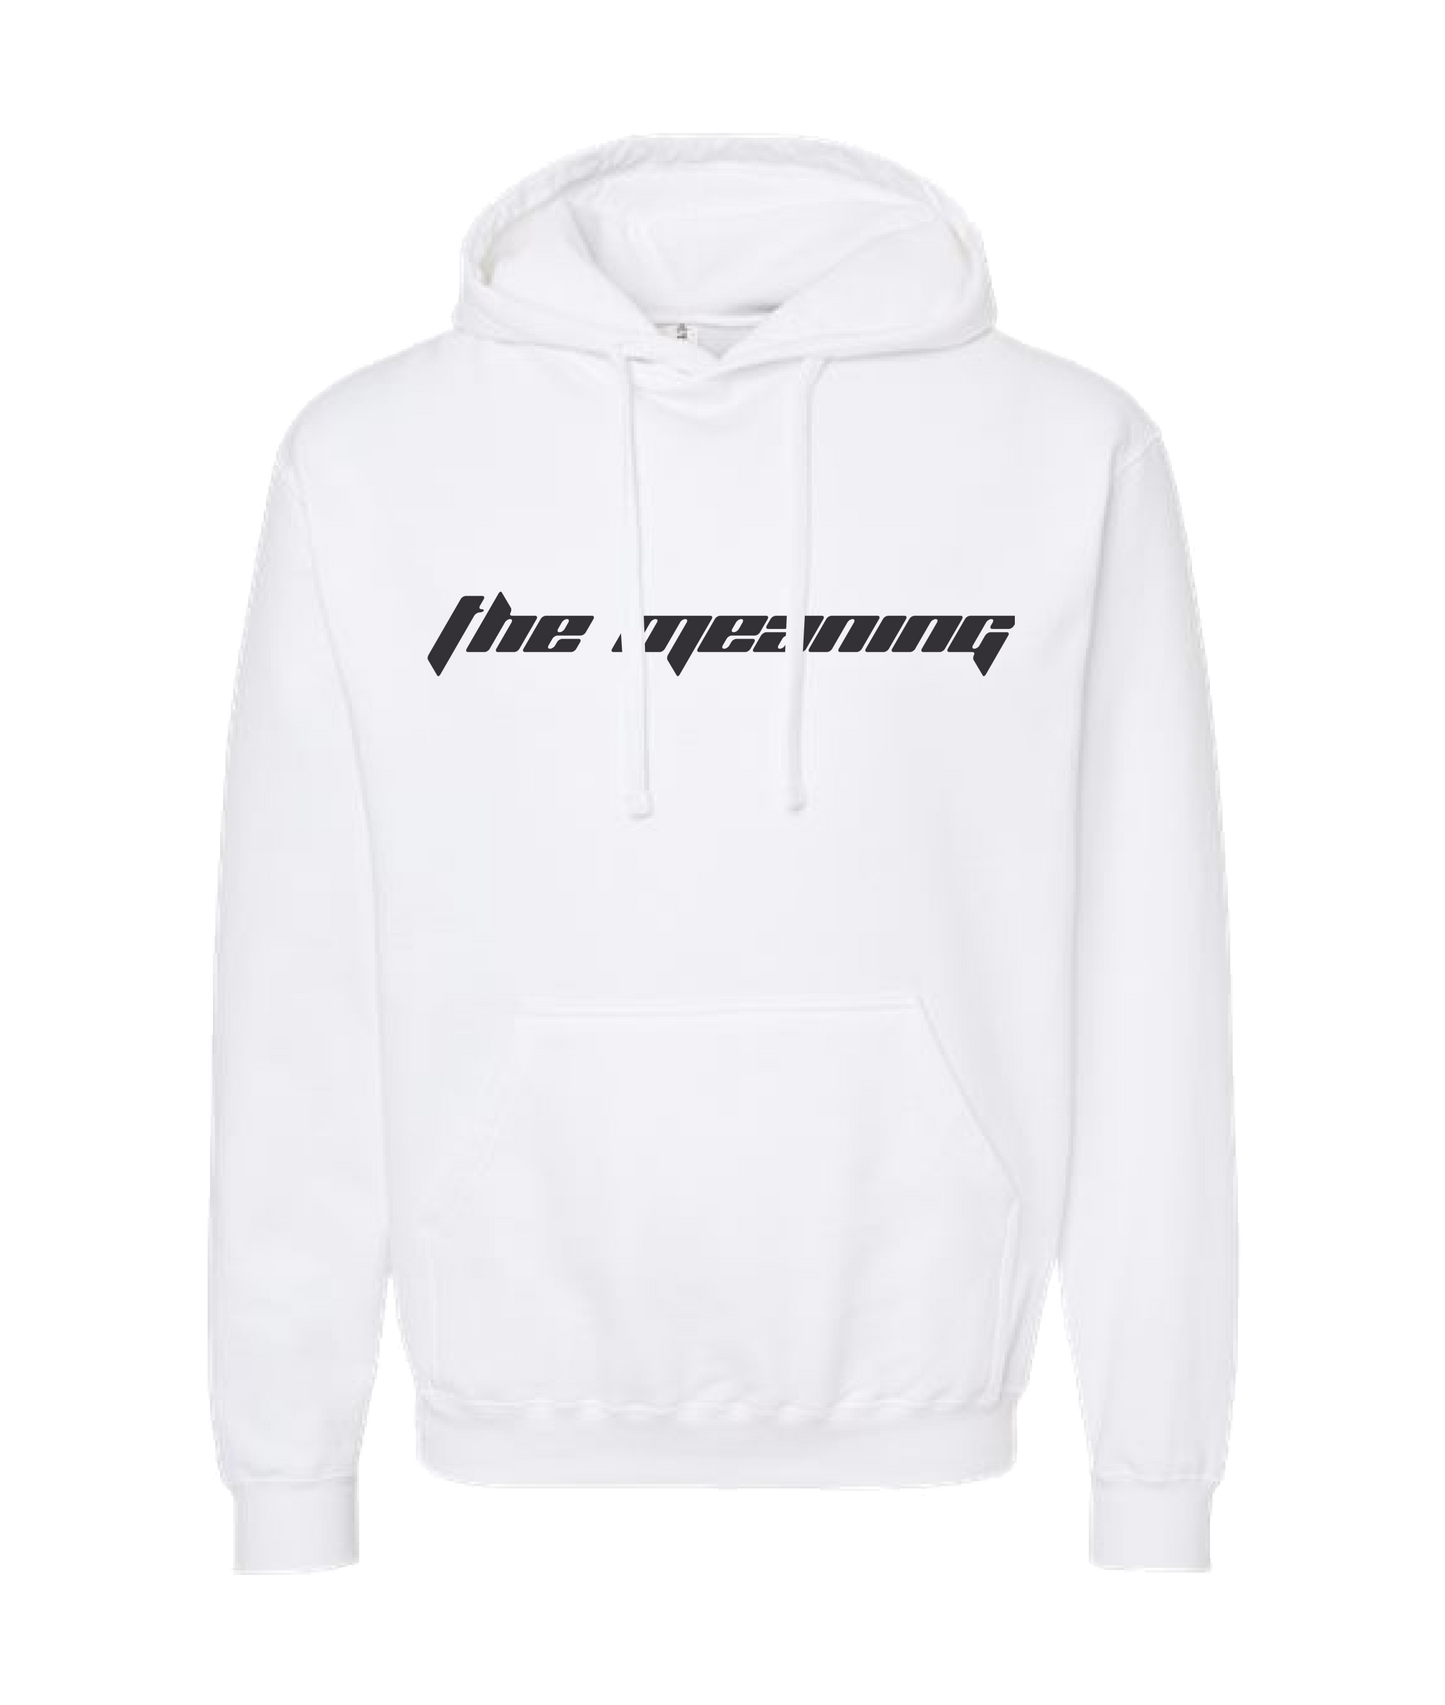 Explit - THE MEANING - White Hoodie